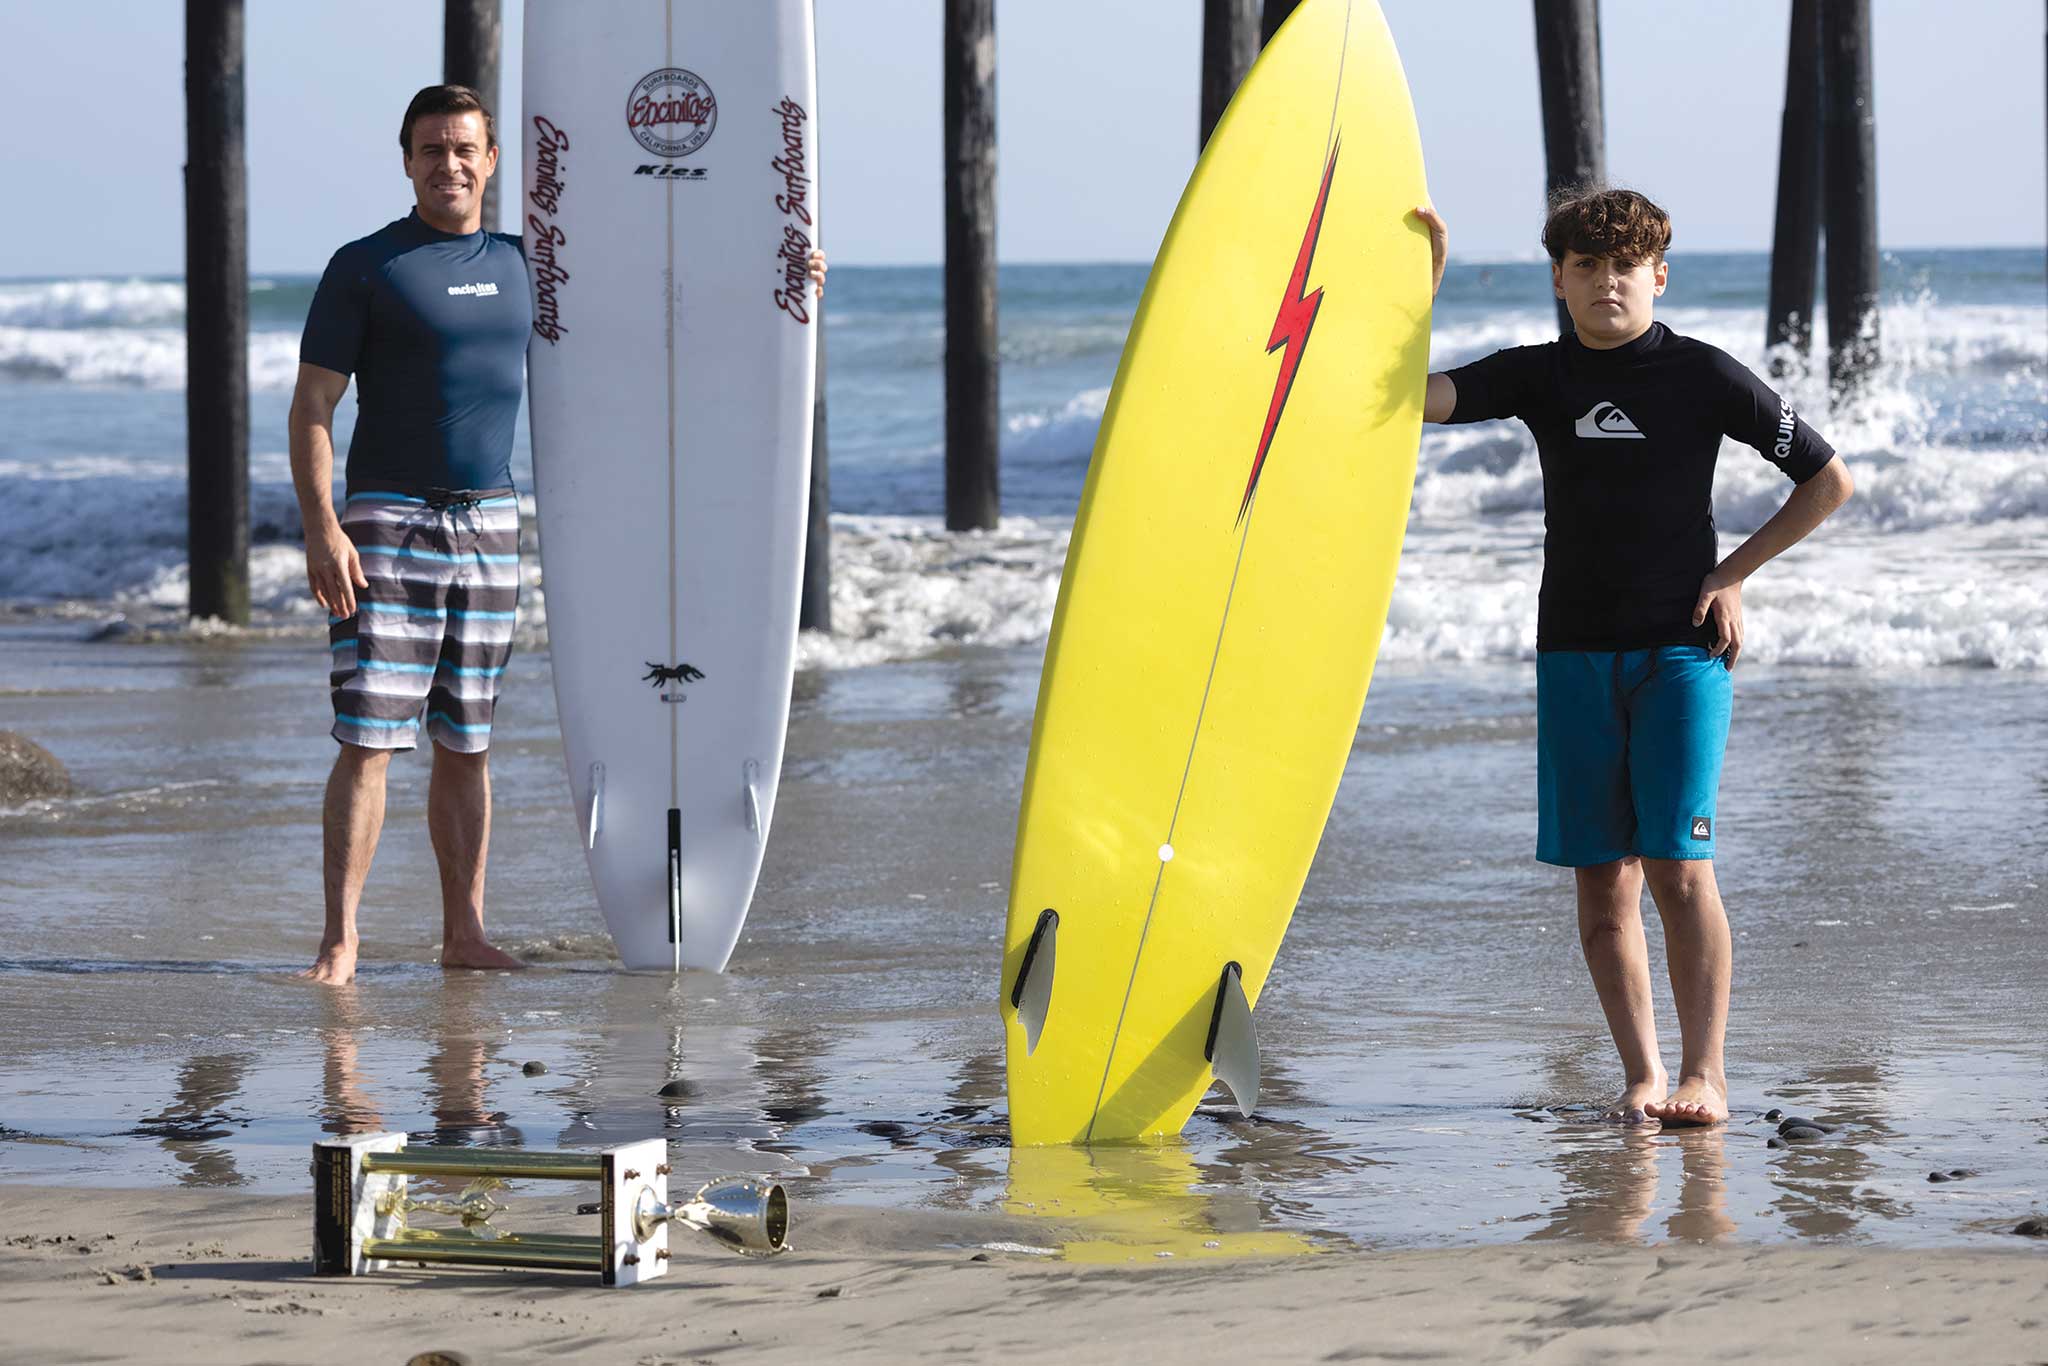 San surf stars and those who've settled for next best thing | San Diego Reader